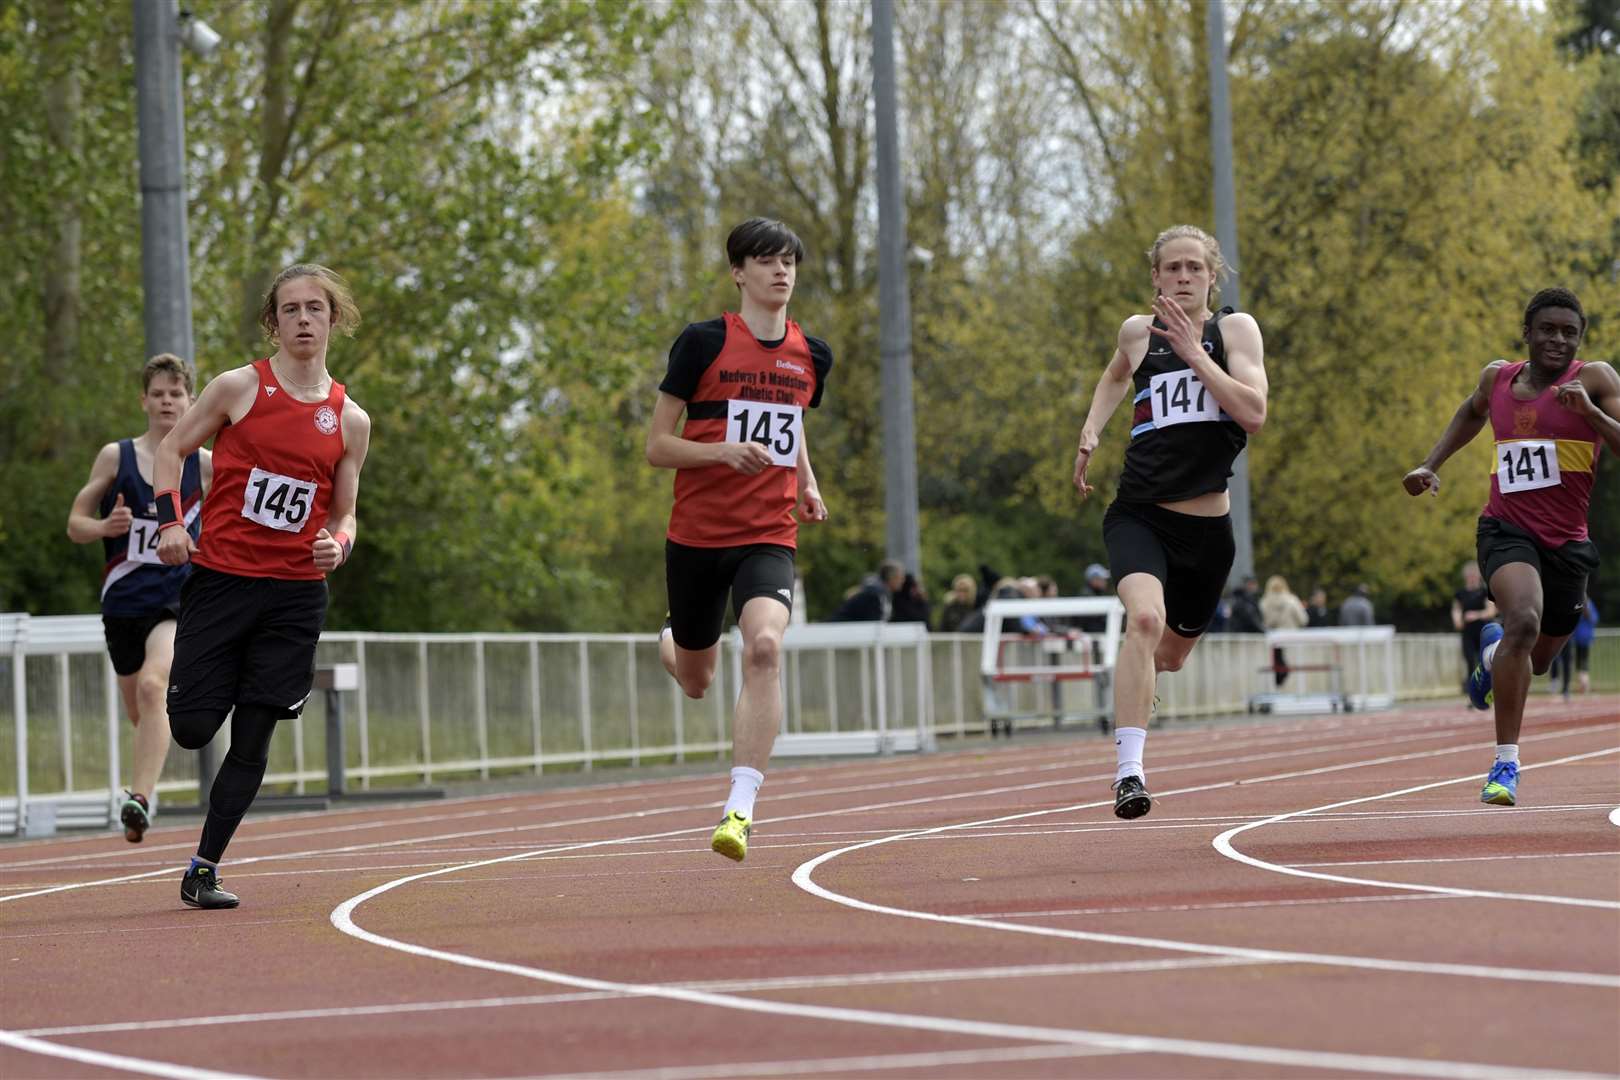 Reef Page (Invicta East Kent AC), Benjamin Lineker (Medway and Maidstone AC), Matthew Smith (Blackheath & Bromley Harriers AC) and Jonathan Idowu (Dartford Grammar School) race in the u17 400m Picture: Barry Goodwin